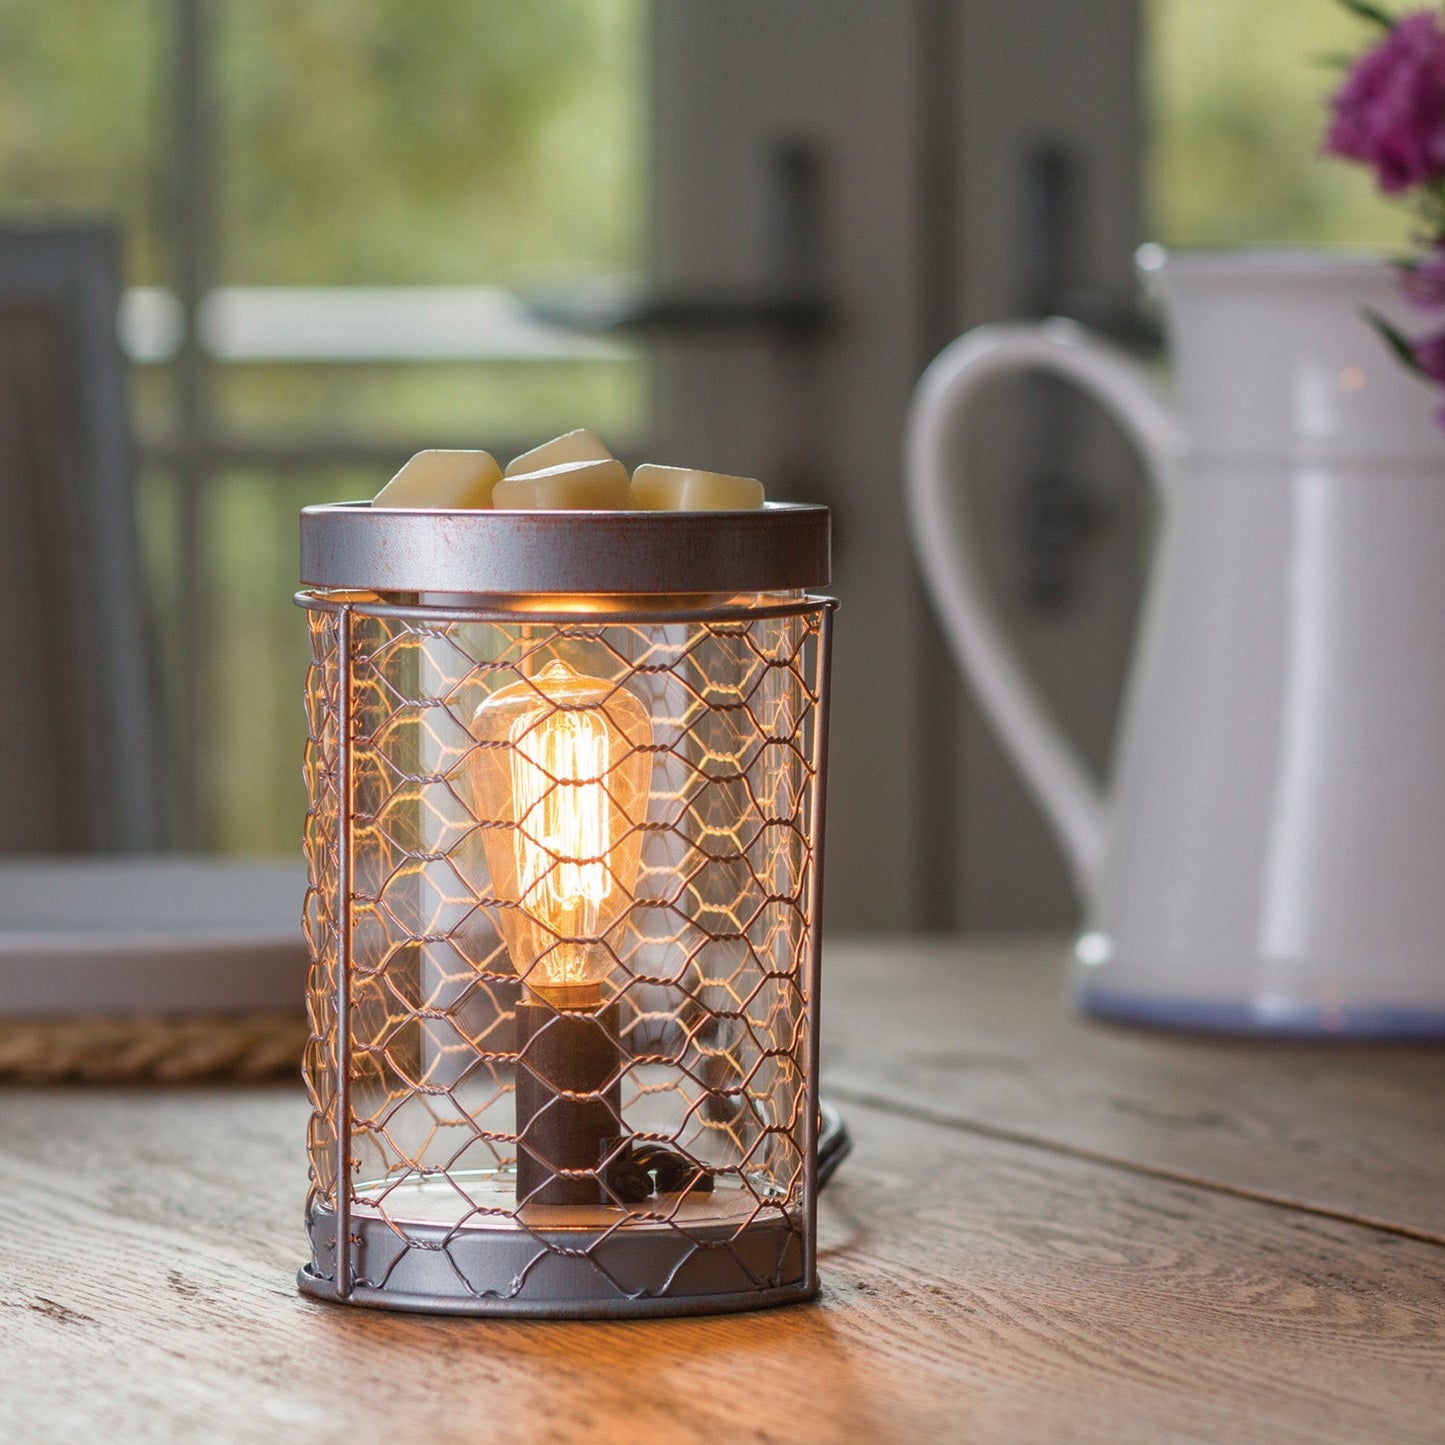 Chicken Wire Vintage Bulb Electric Fragrance Warmer